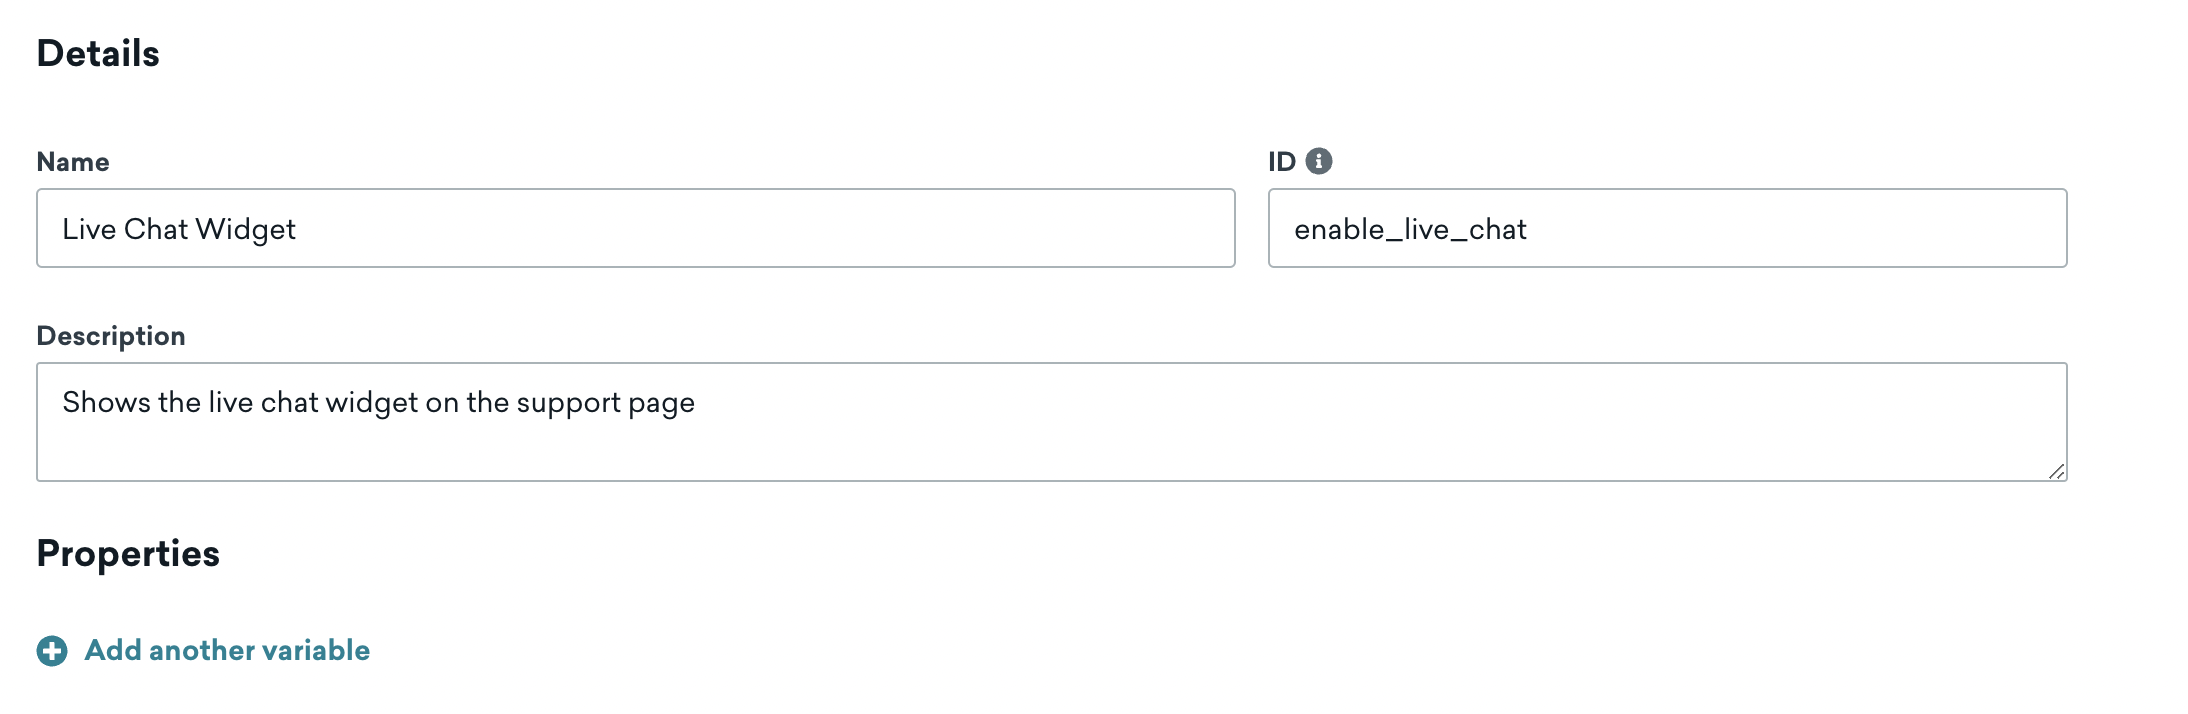 Feature flag called "enable_live_chat"